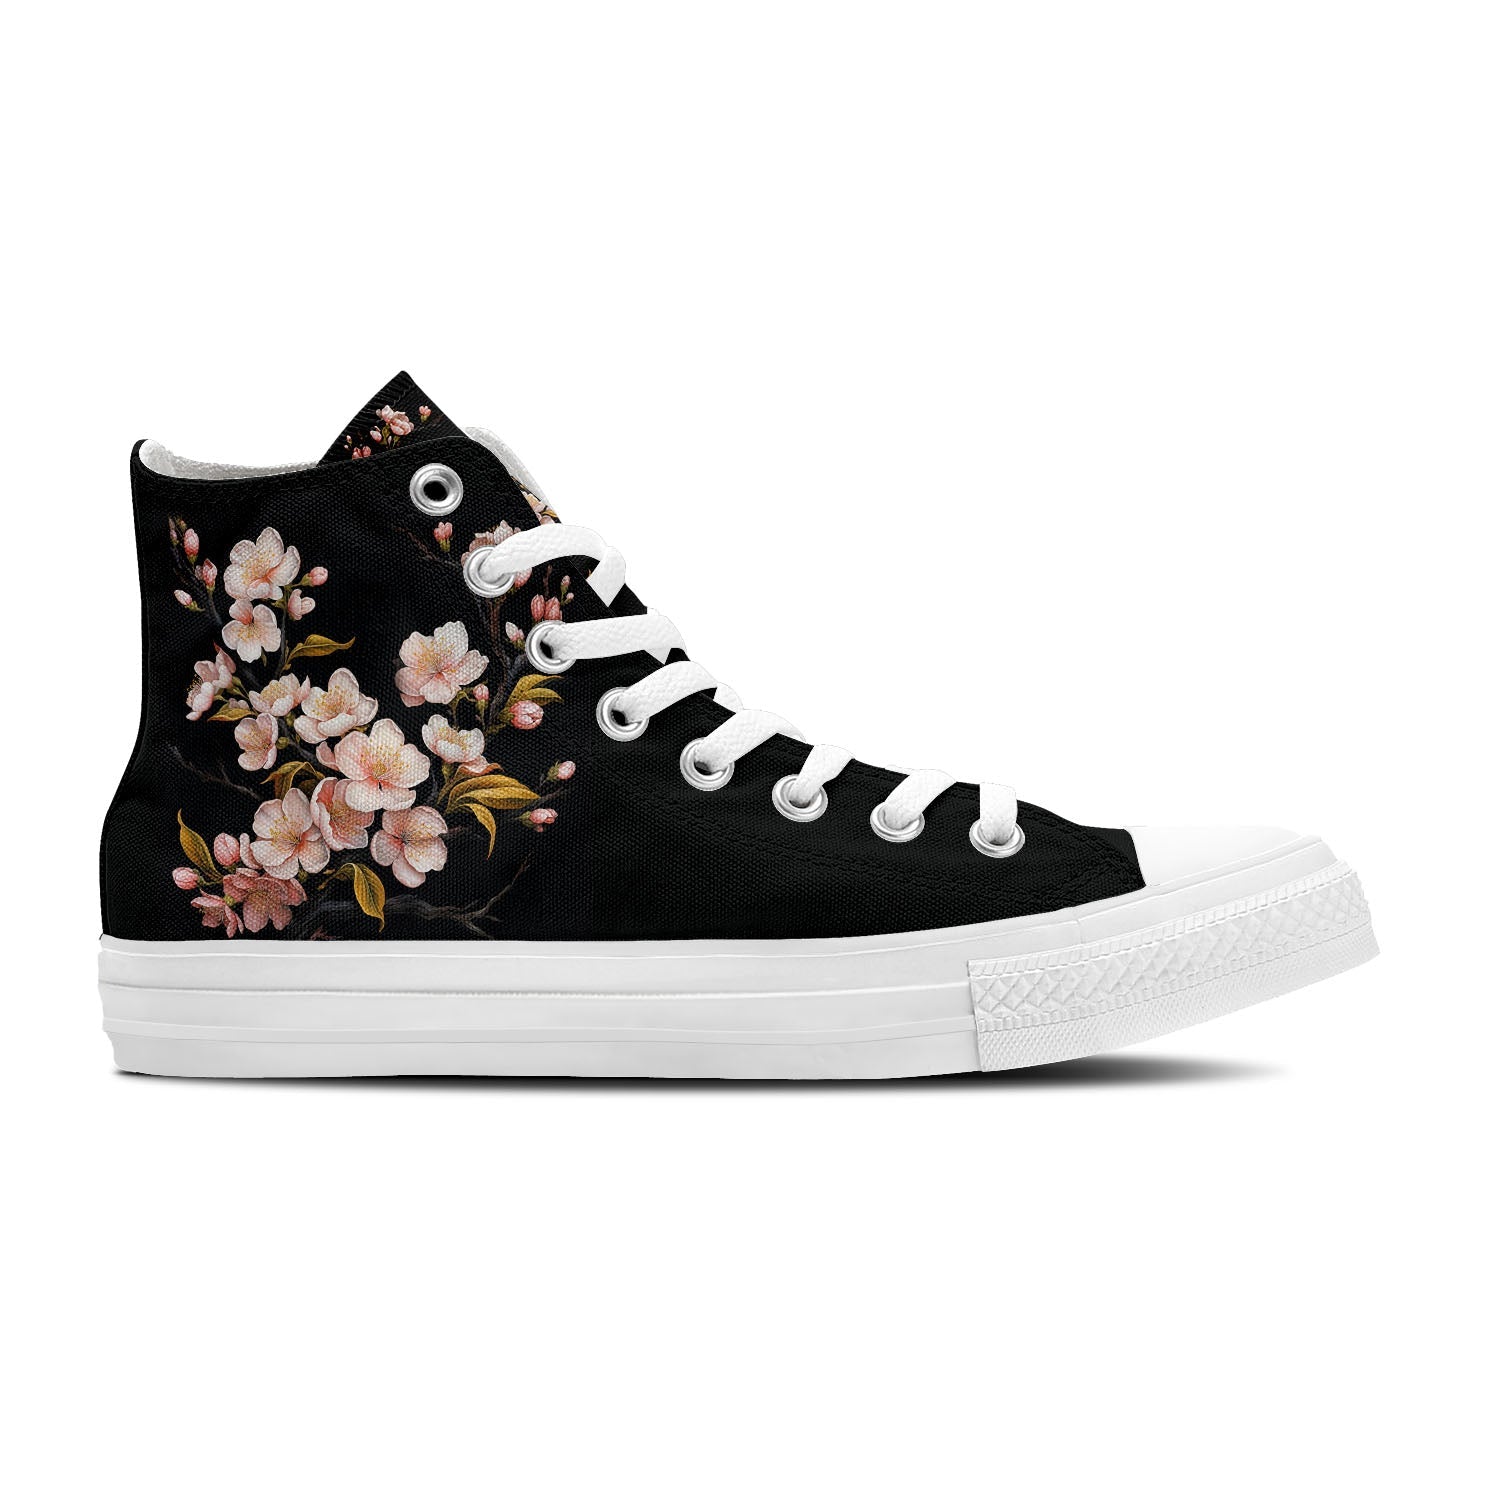 Petals in Motion: Elevate Your Style with Central-High Canvas Shoes - Unisex Floral Fashion, Blooming with Plum Blossom Elegance